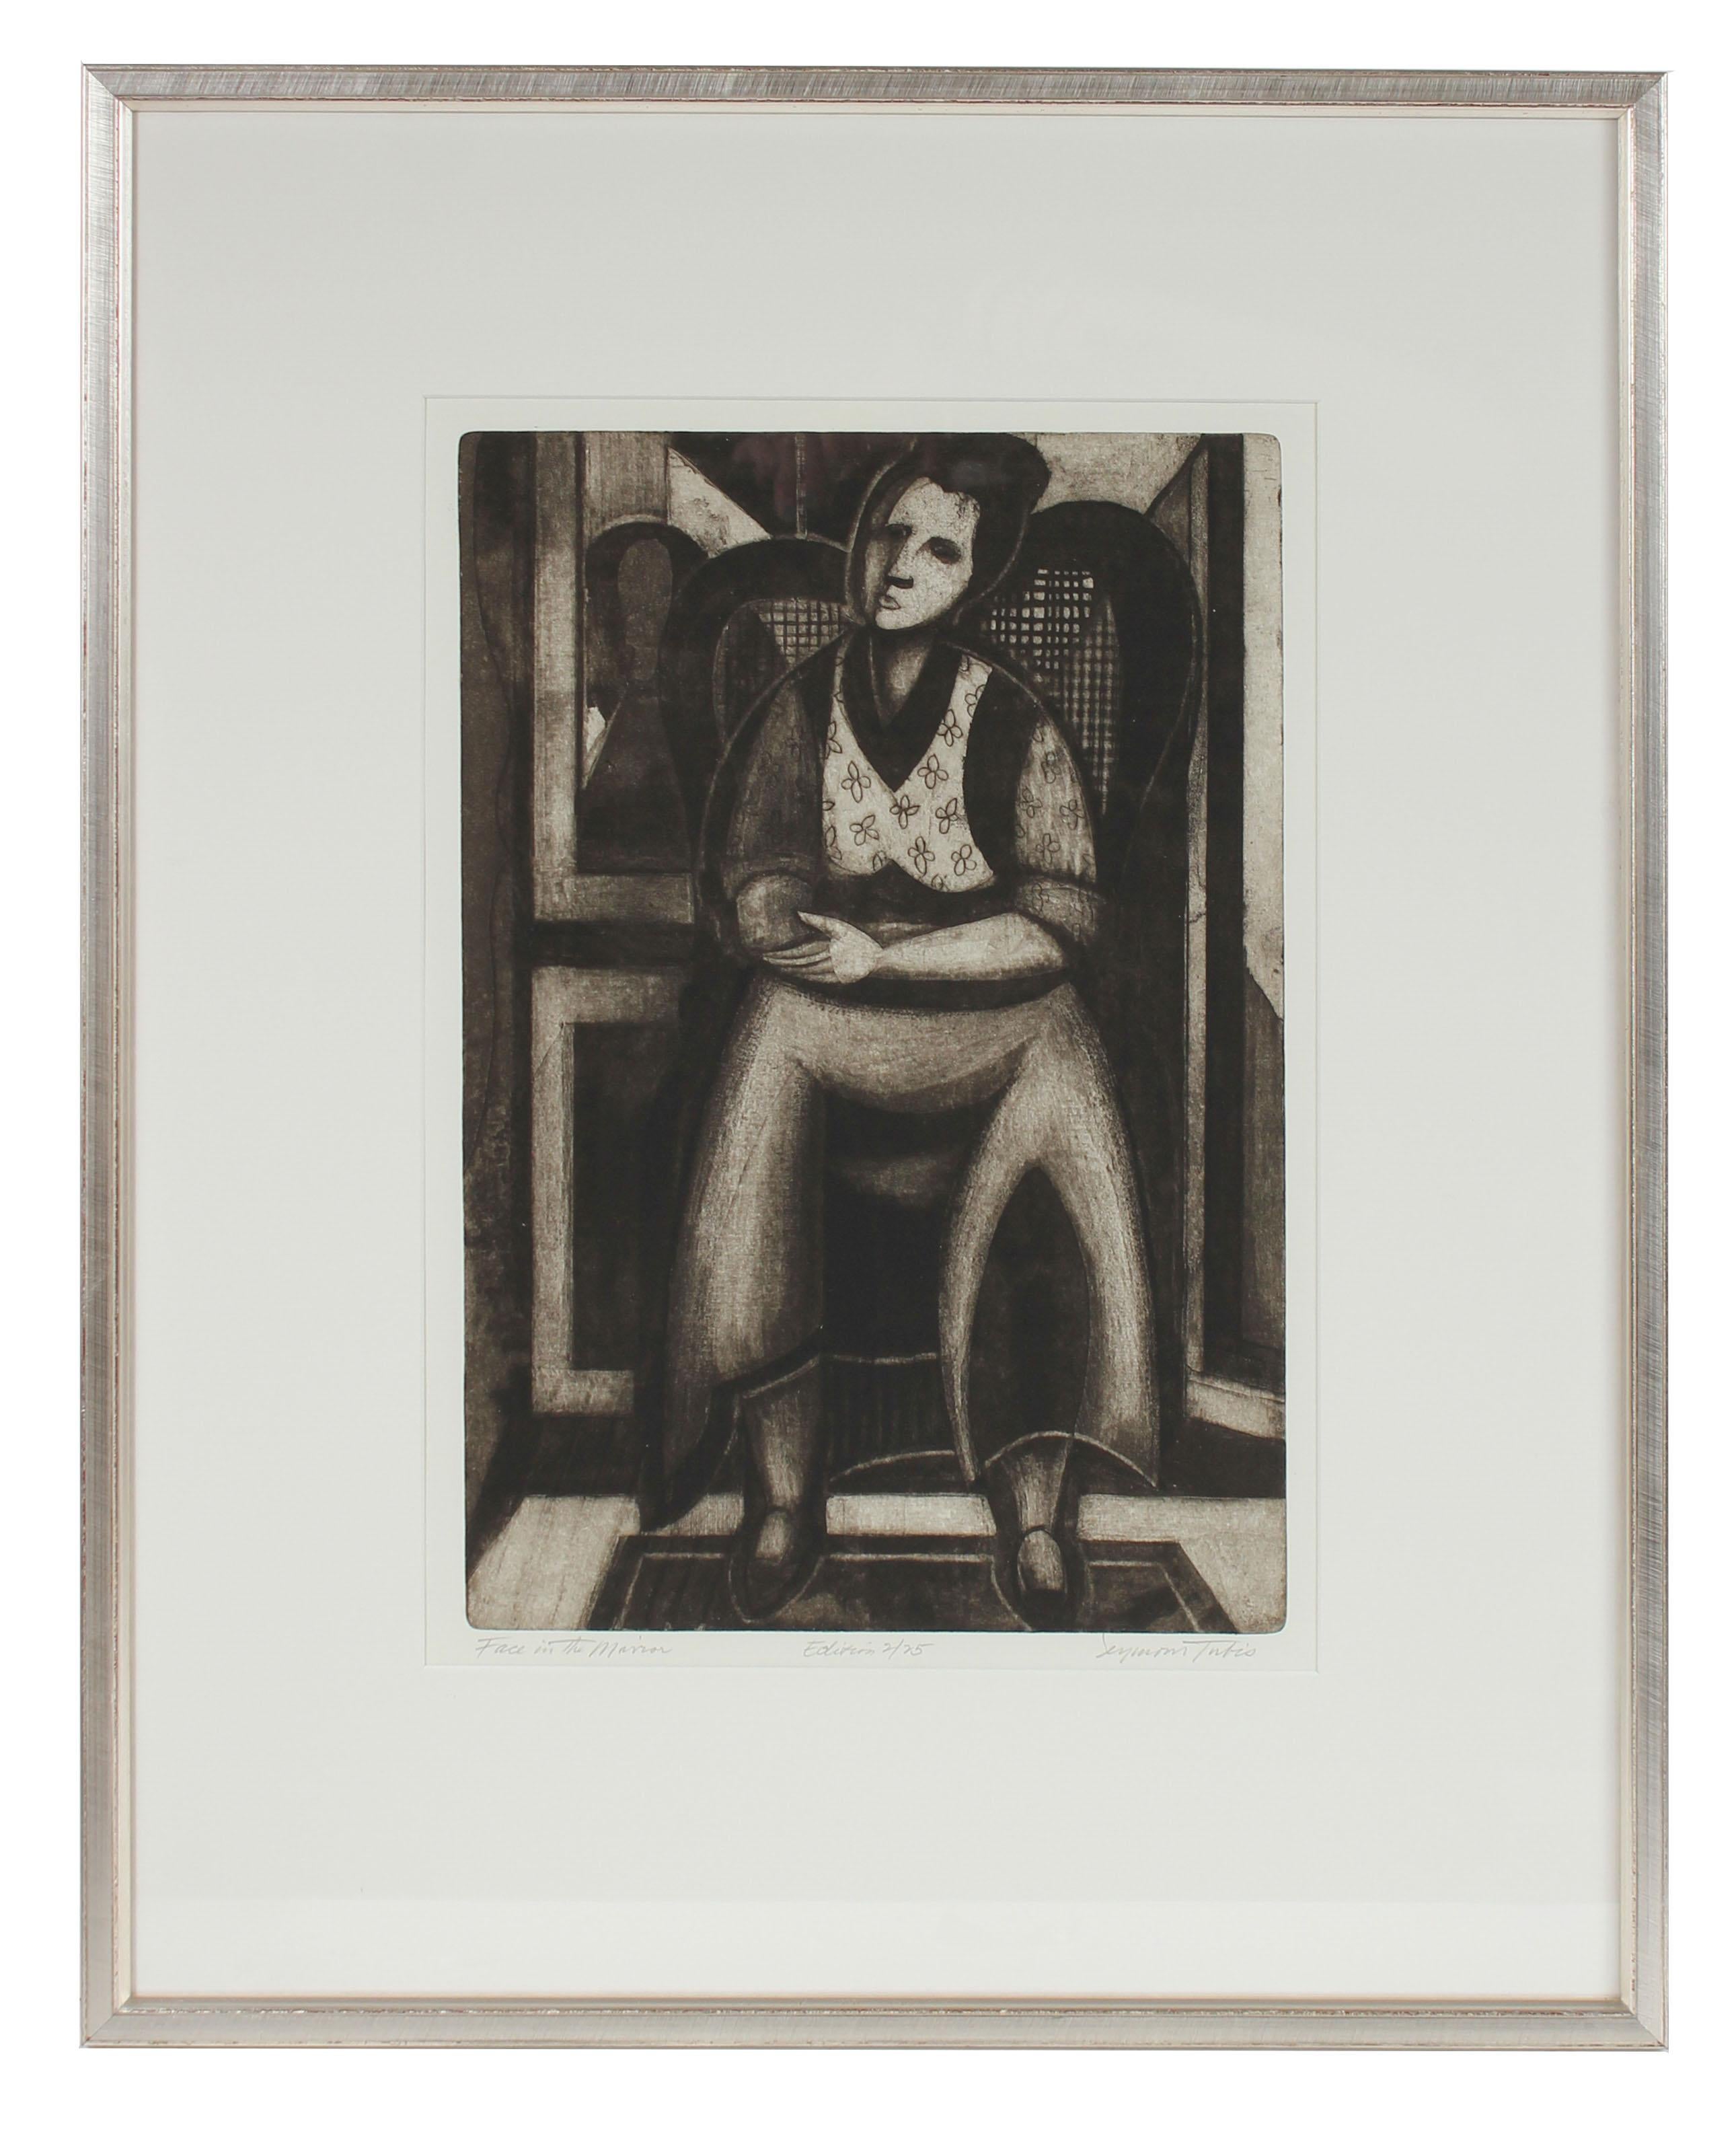 "Face in the Mirror" Monochromatic Portrait Etching in a Silver Frame, June 1949 - Mixed Media Art by Seymour Tubis